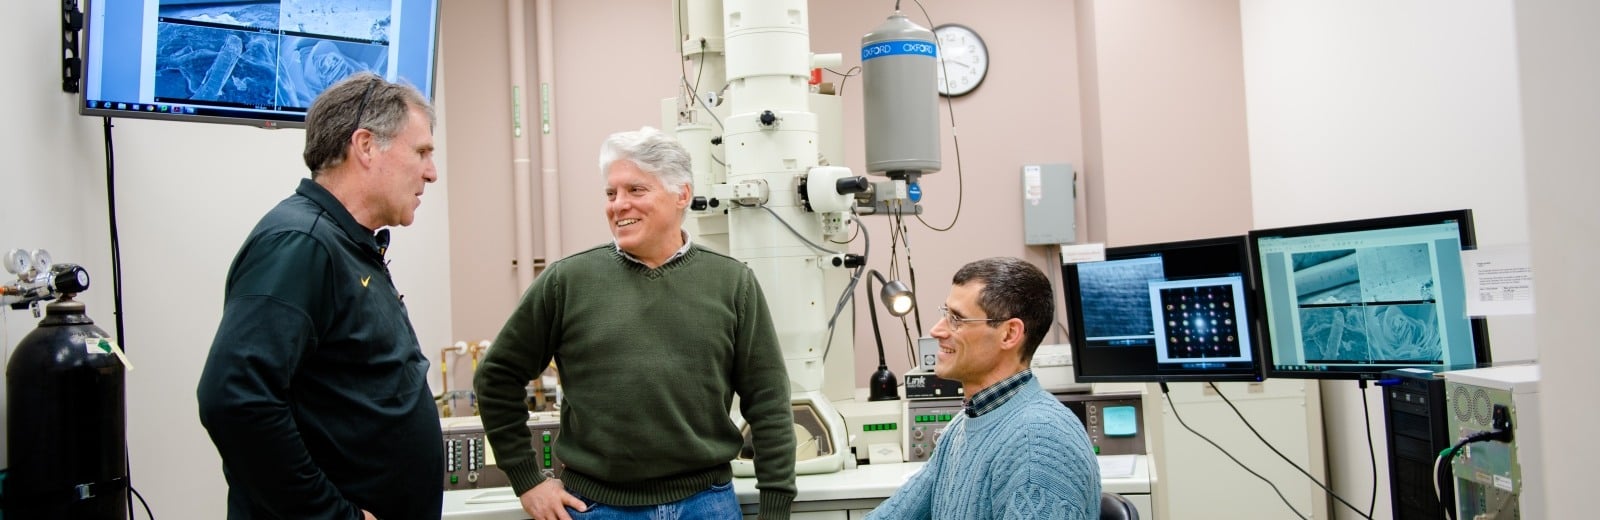 Two researchers discuss results on a moniter from an electron microsope